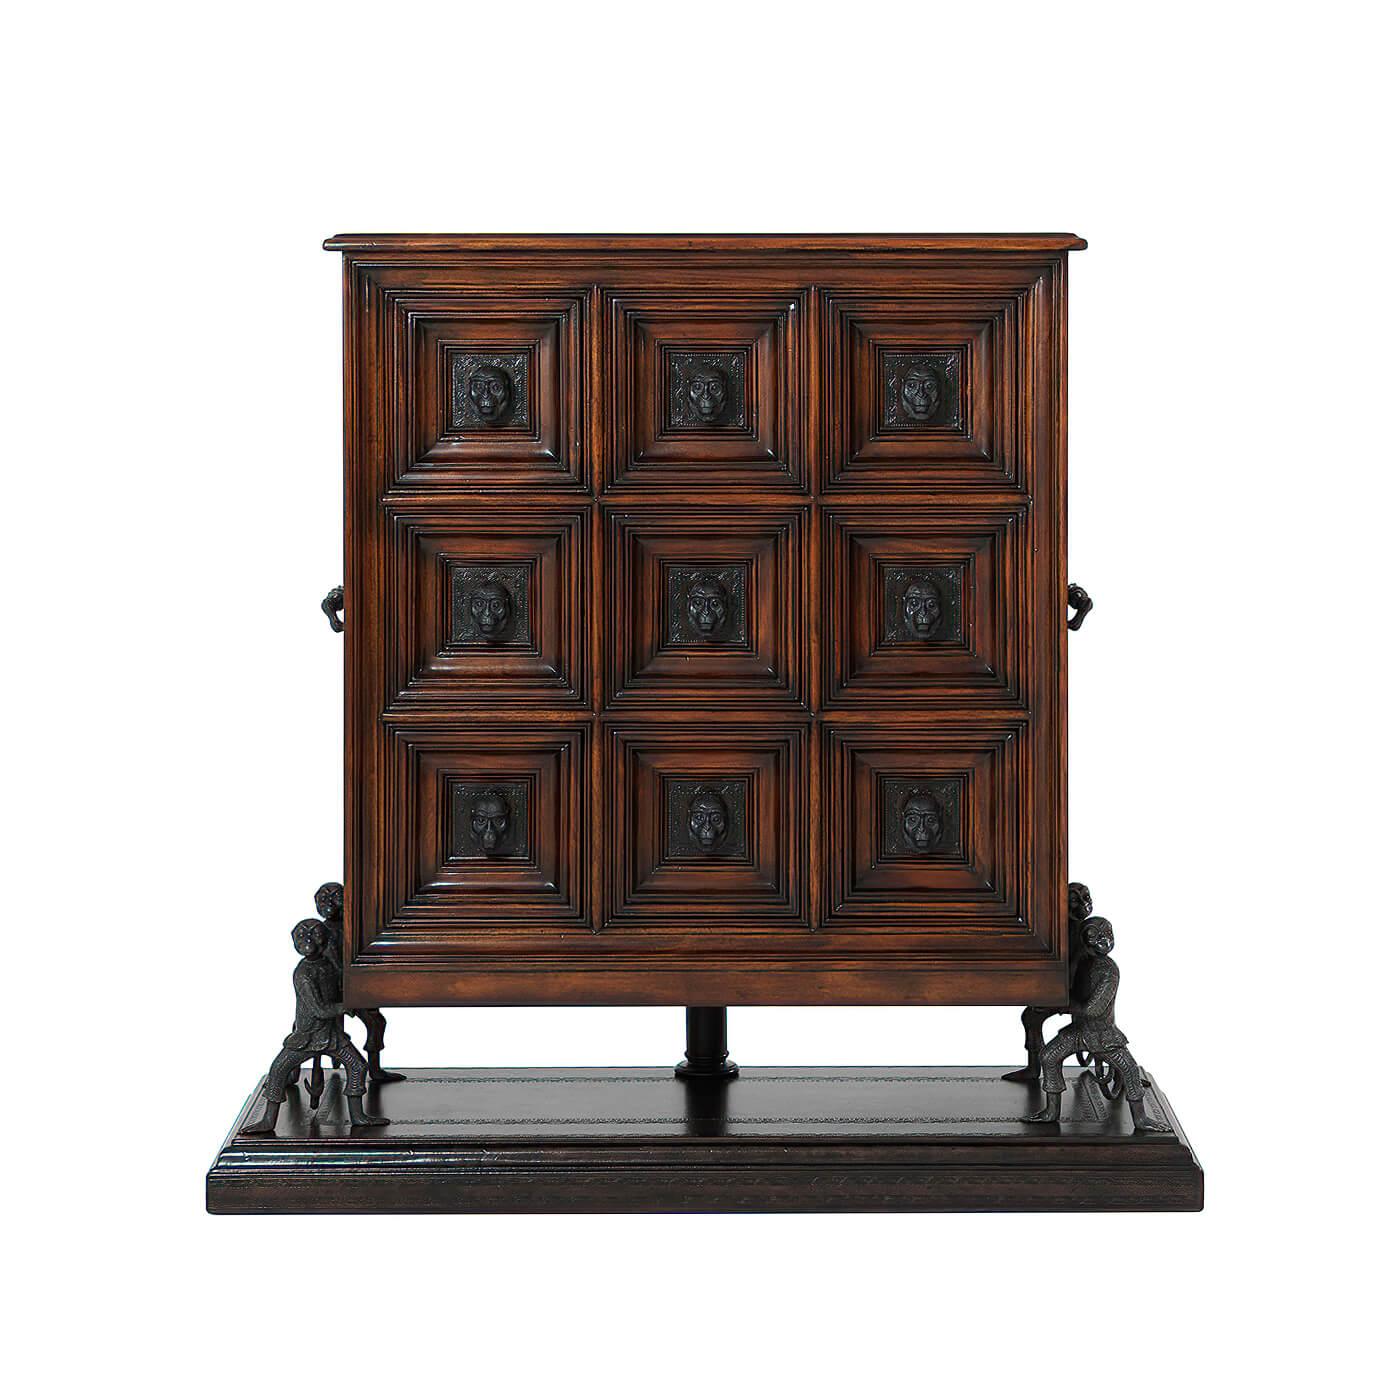 An unusual Italian 19th-century style leather panel chest on stand, with nine drawers having monkey head handles, on four brass monkey supports and a leather plinth base. The original 19th century Italian.

Dimension: 42.25